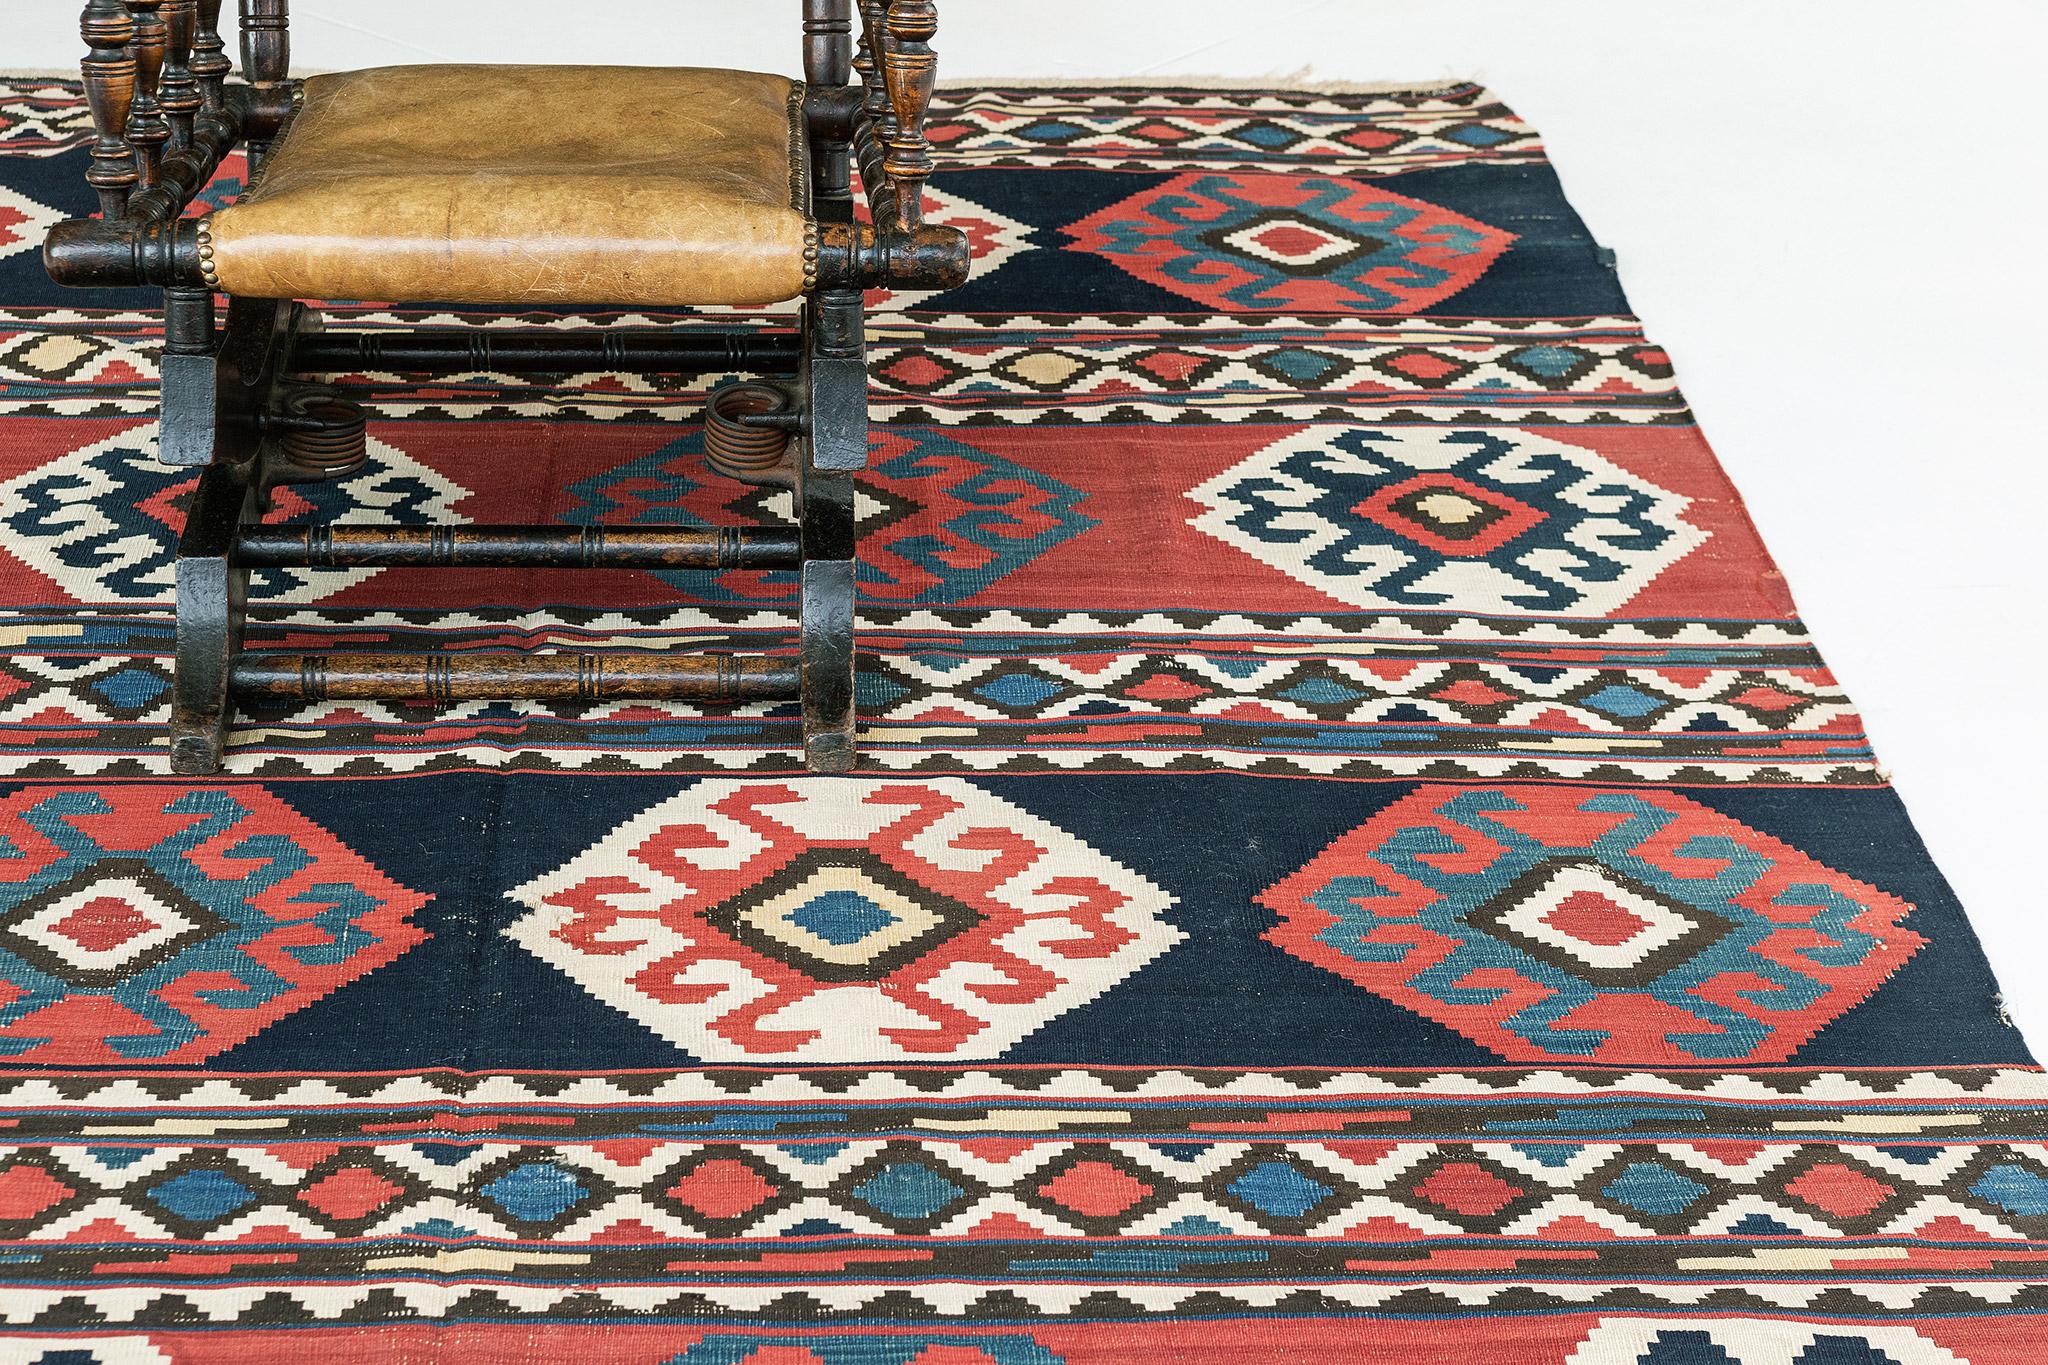 Early 20th Century Antique Caucasian Shirvan Kilim 55390 For Sale